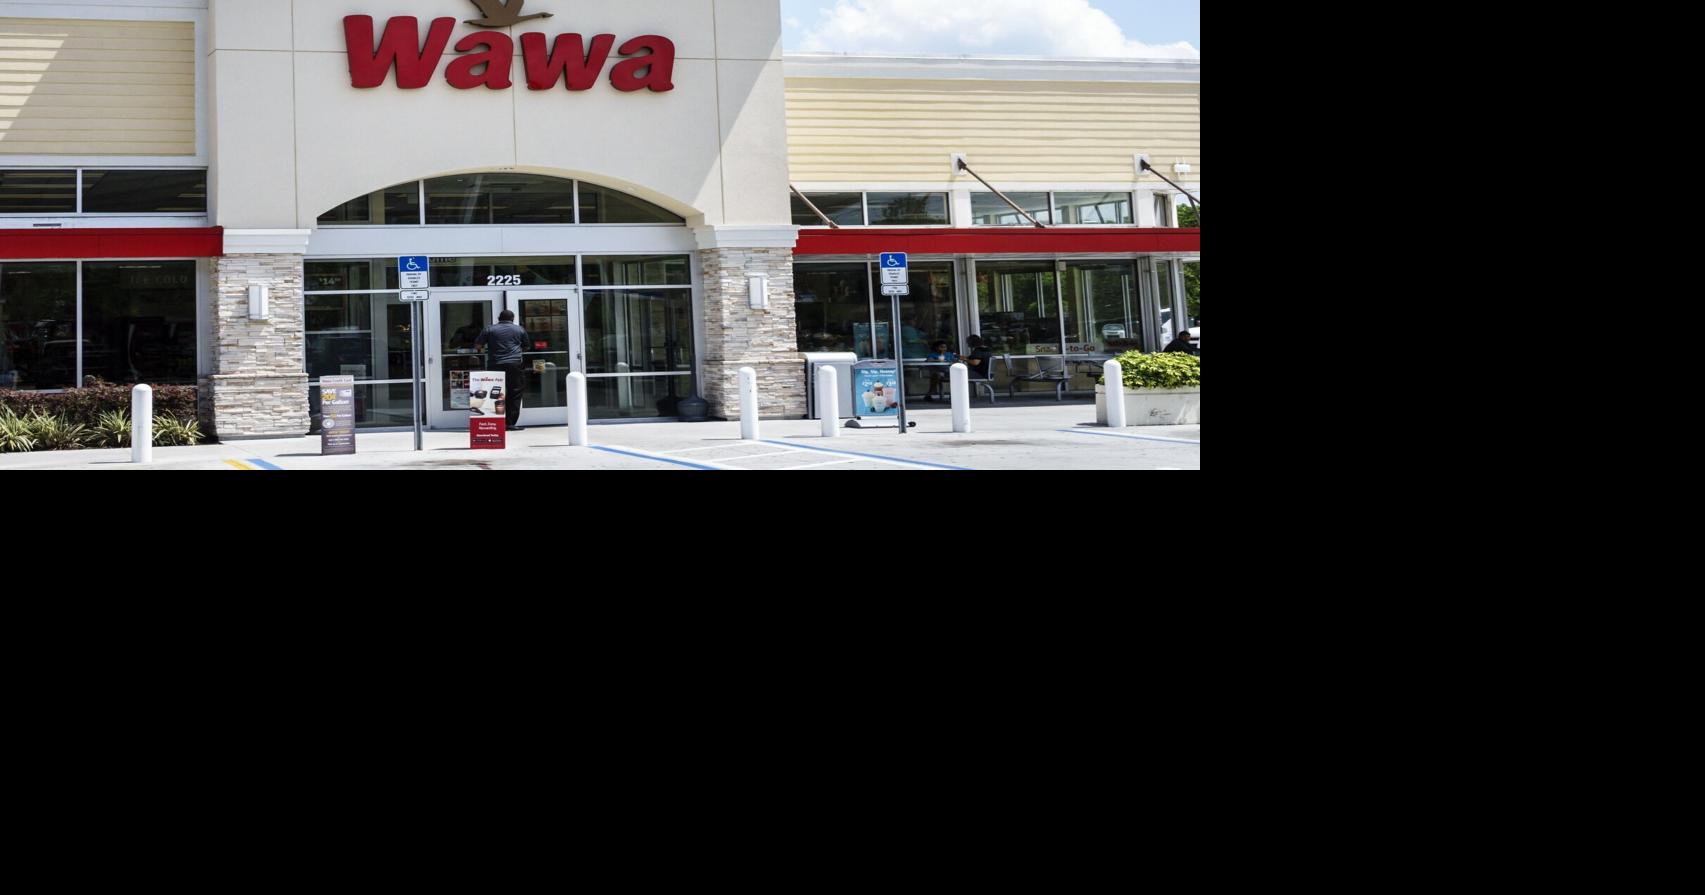 Wawa gears up for celebration at new Stafford store